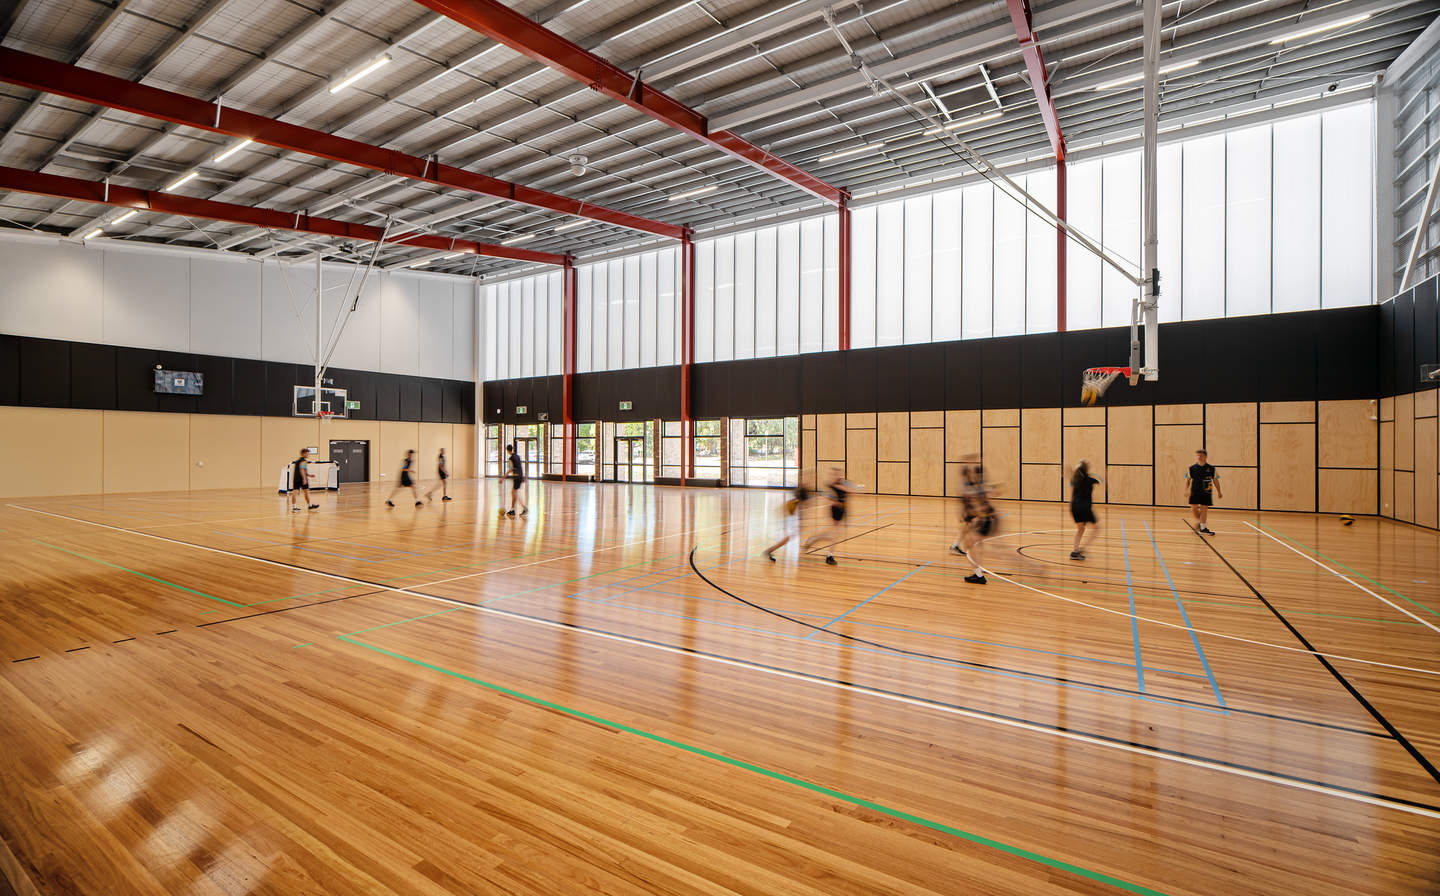 Inside netball centre with kids playing netball.